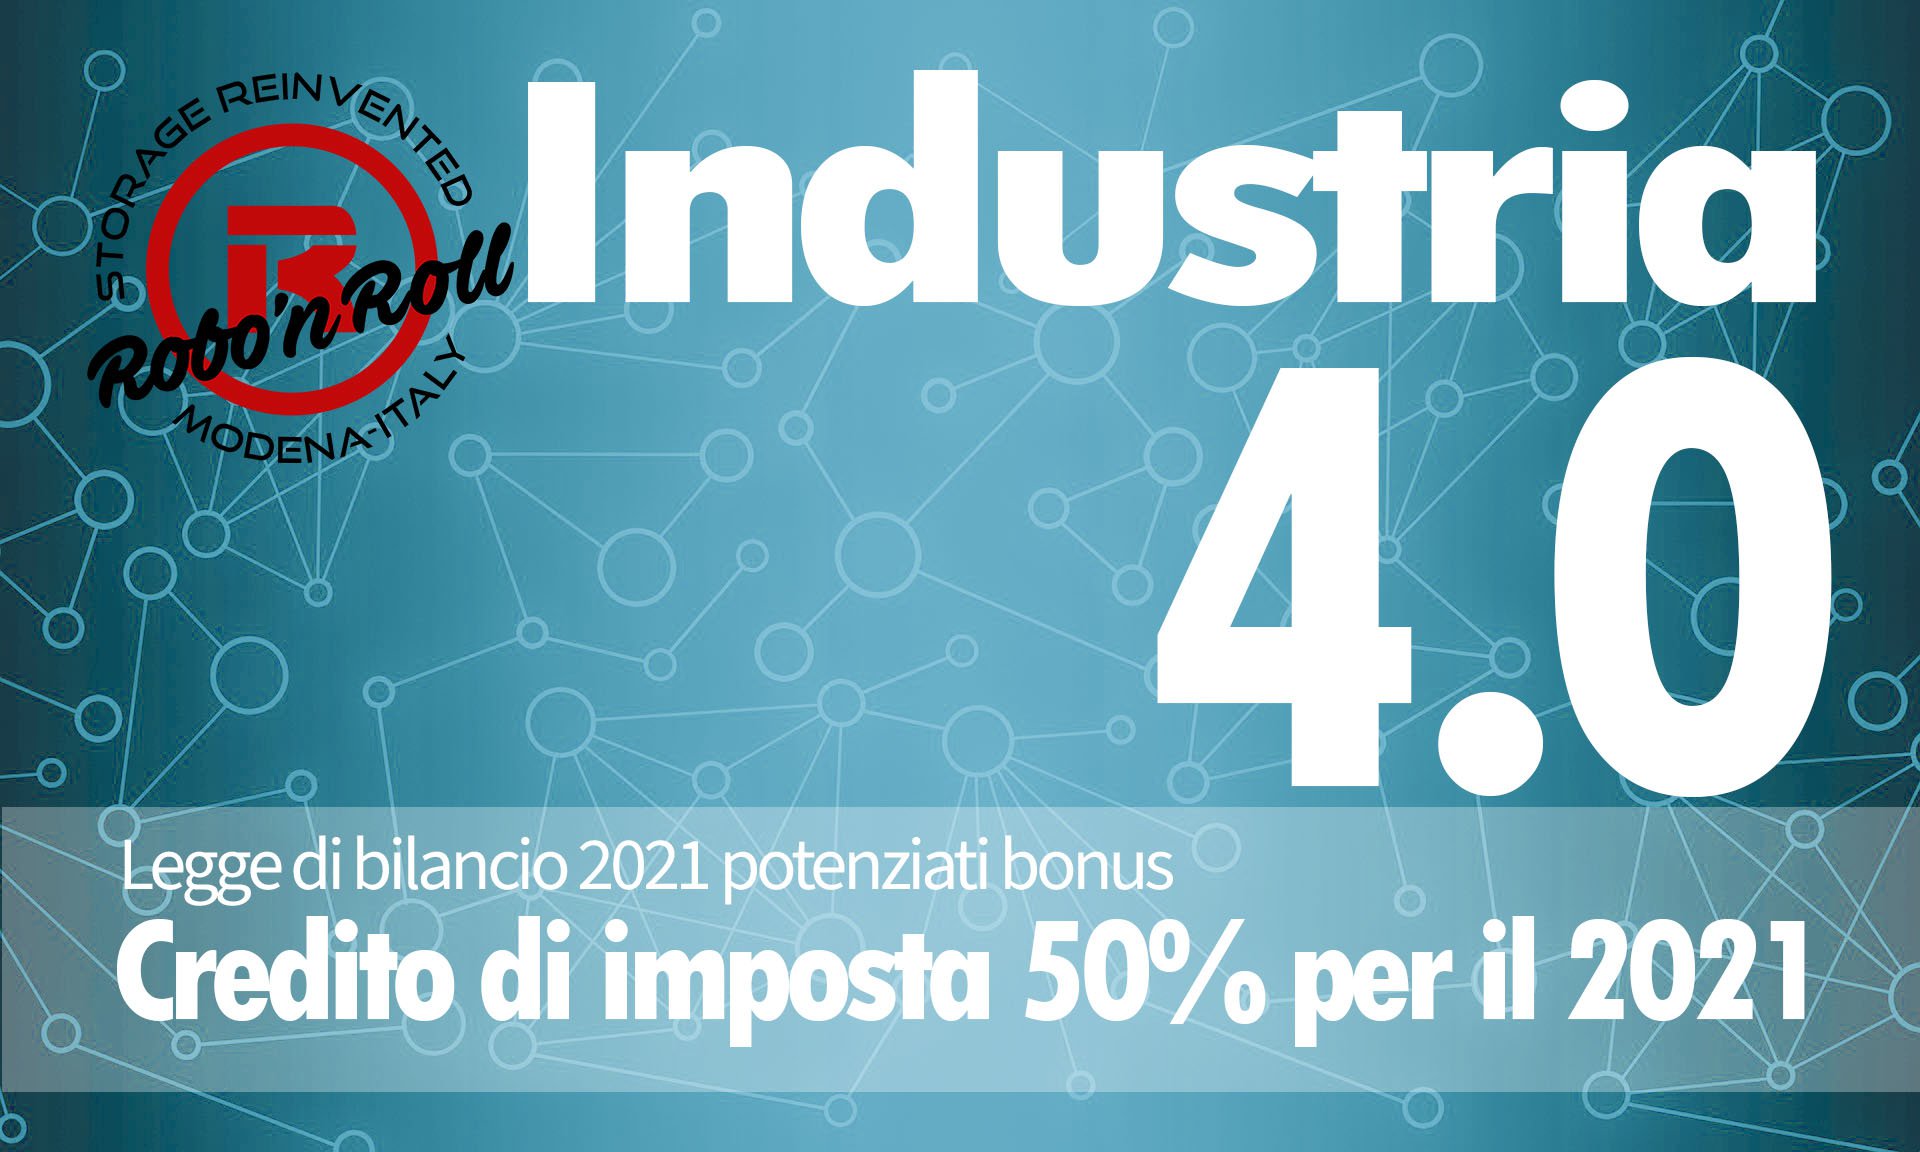 Robo is compliant with Industry 4.0 standards.